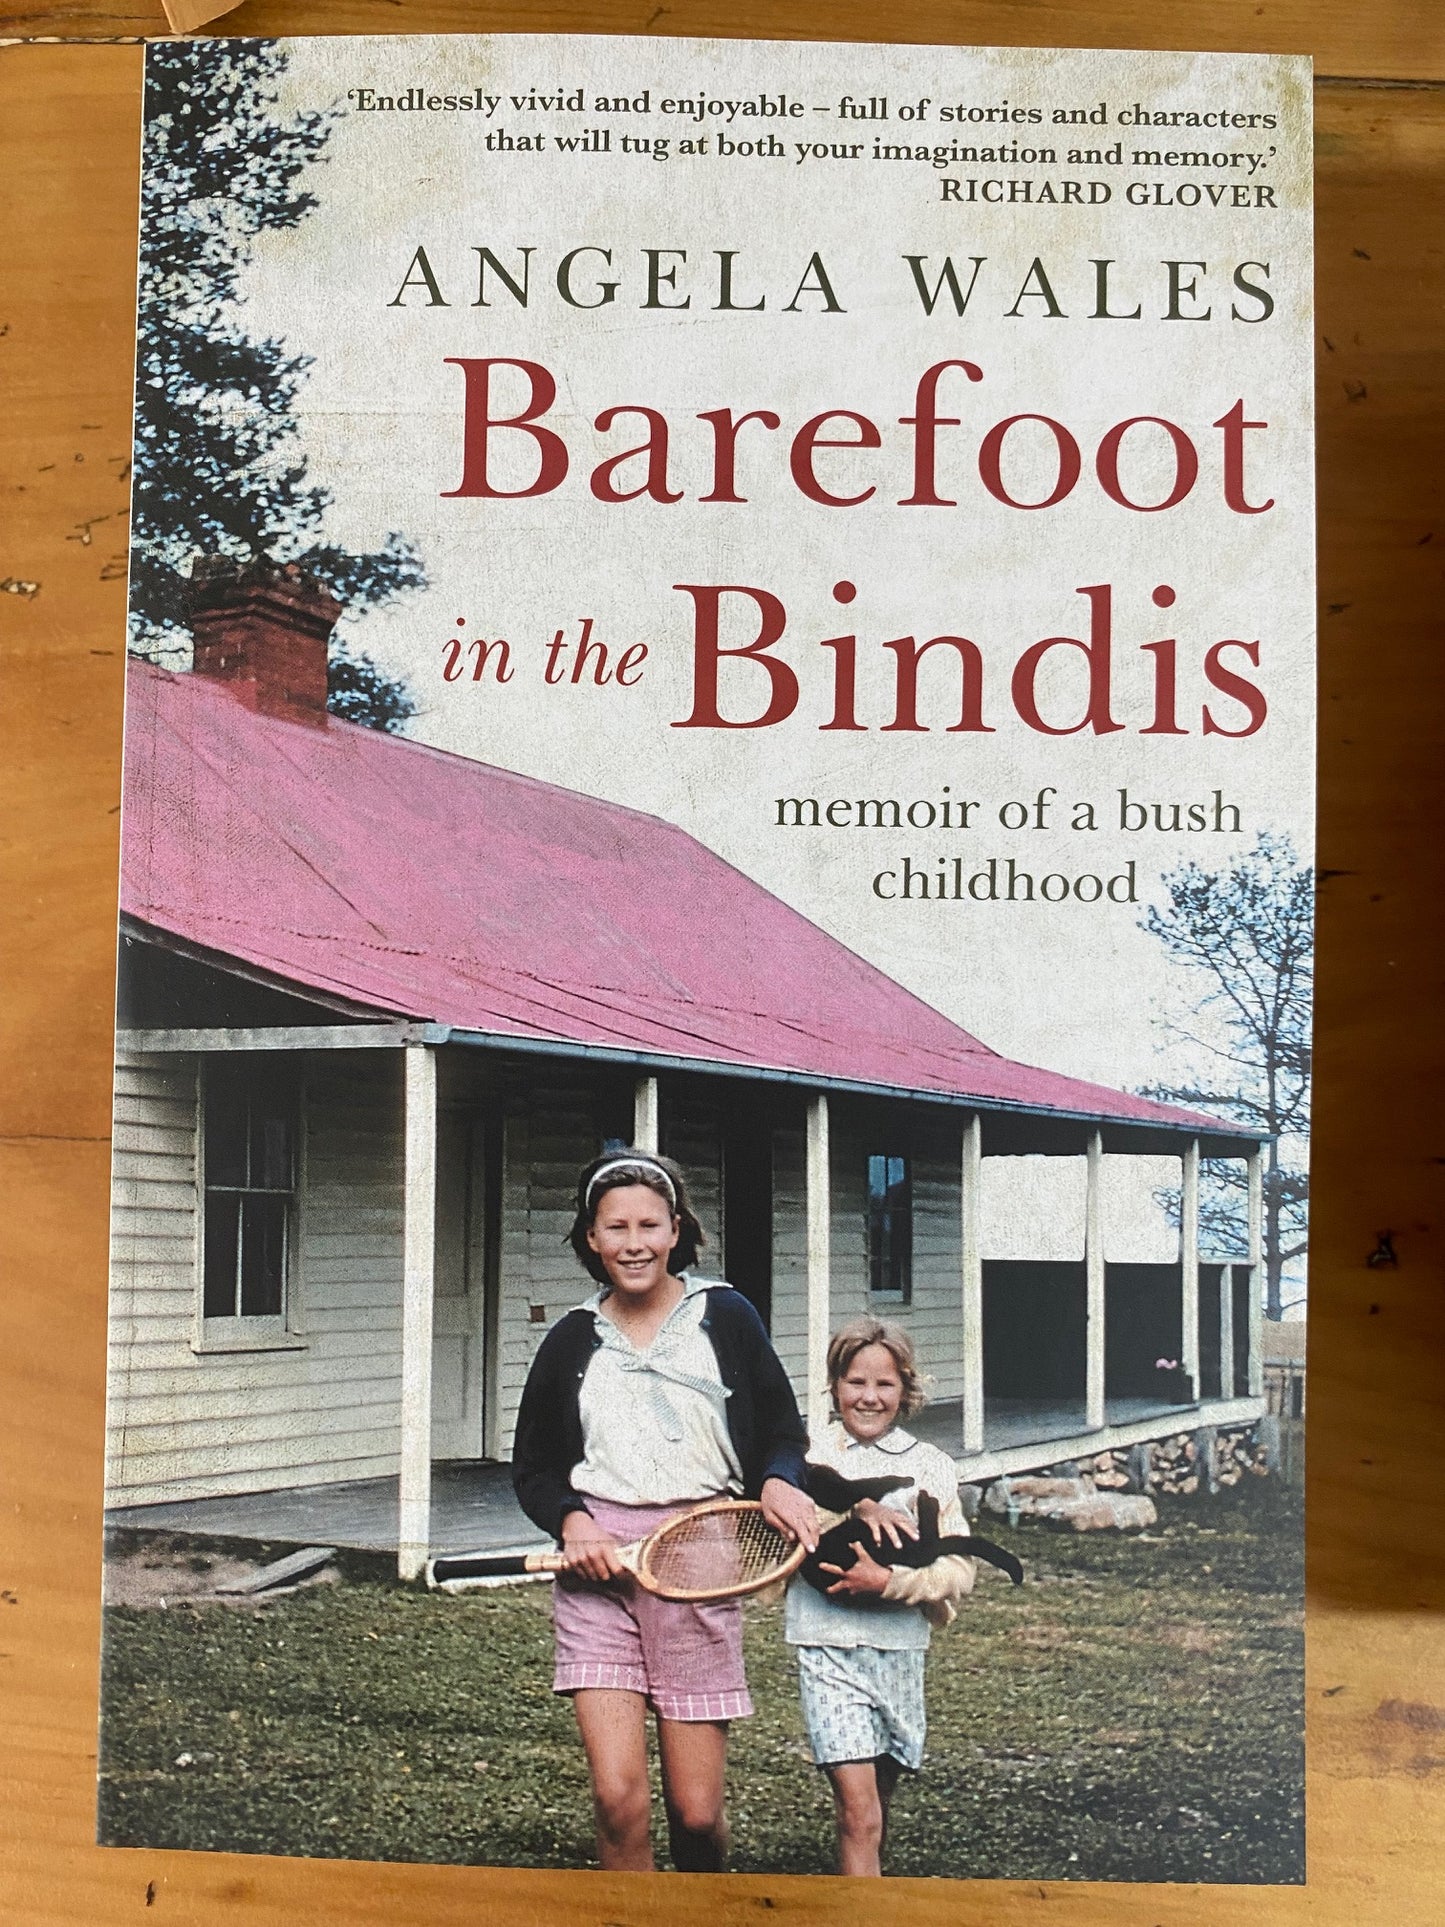 Barefoot in the Bindis by Angela Wales